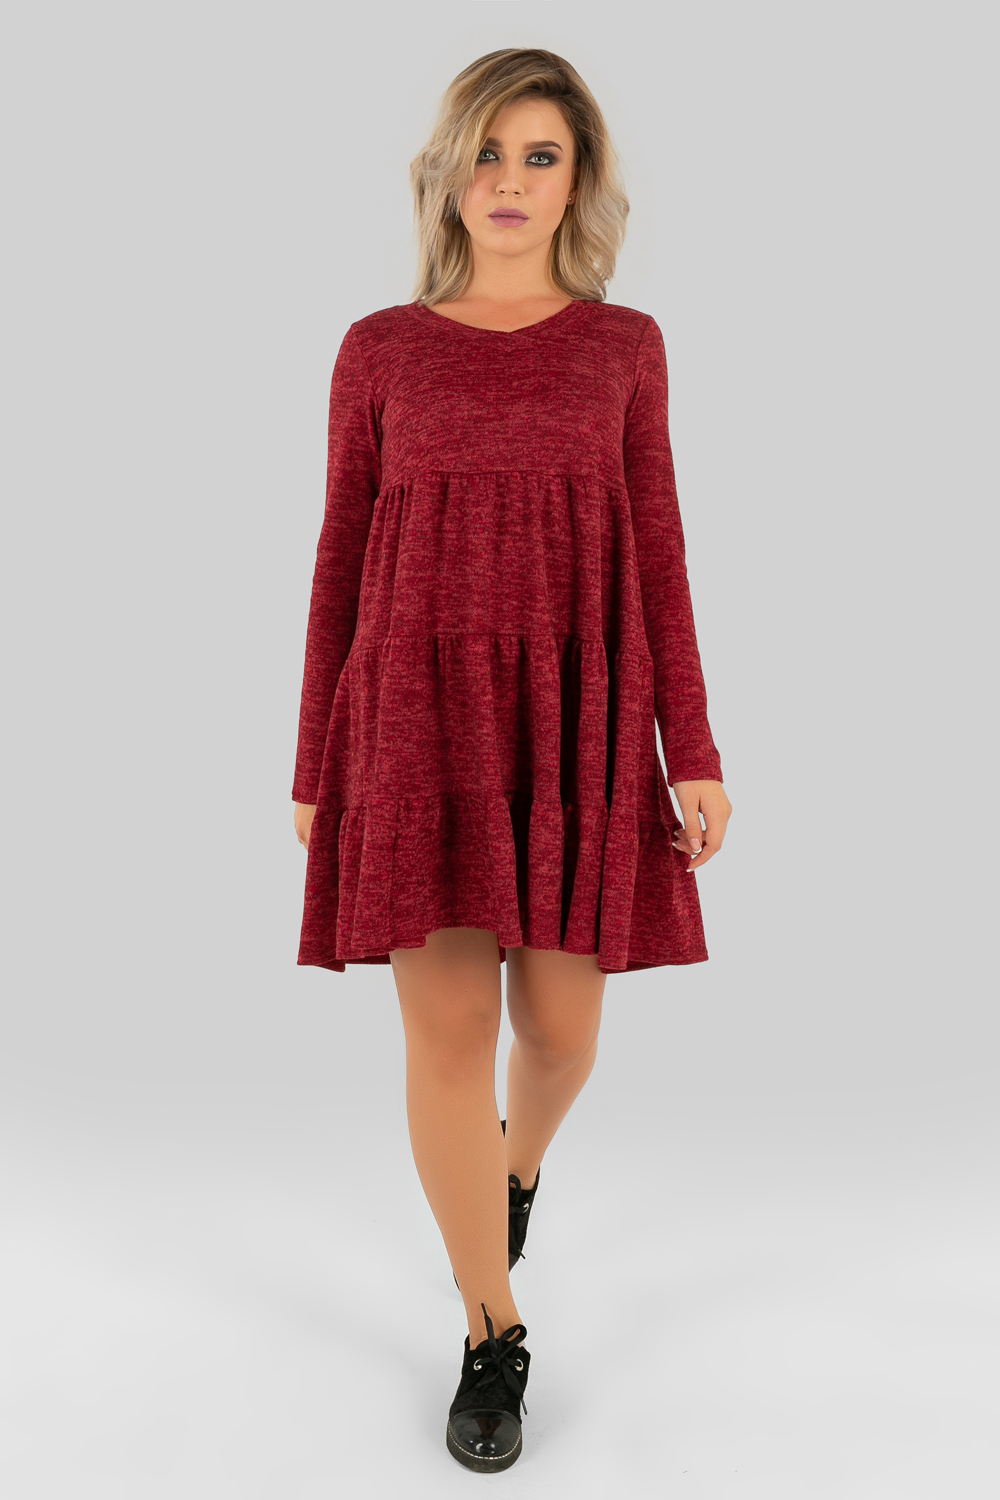 Knit dress with angora ruffles in burgundy colour